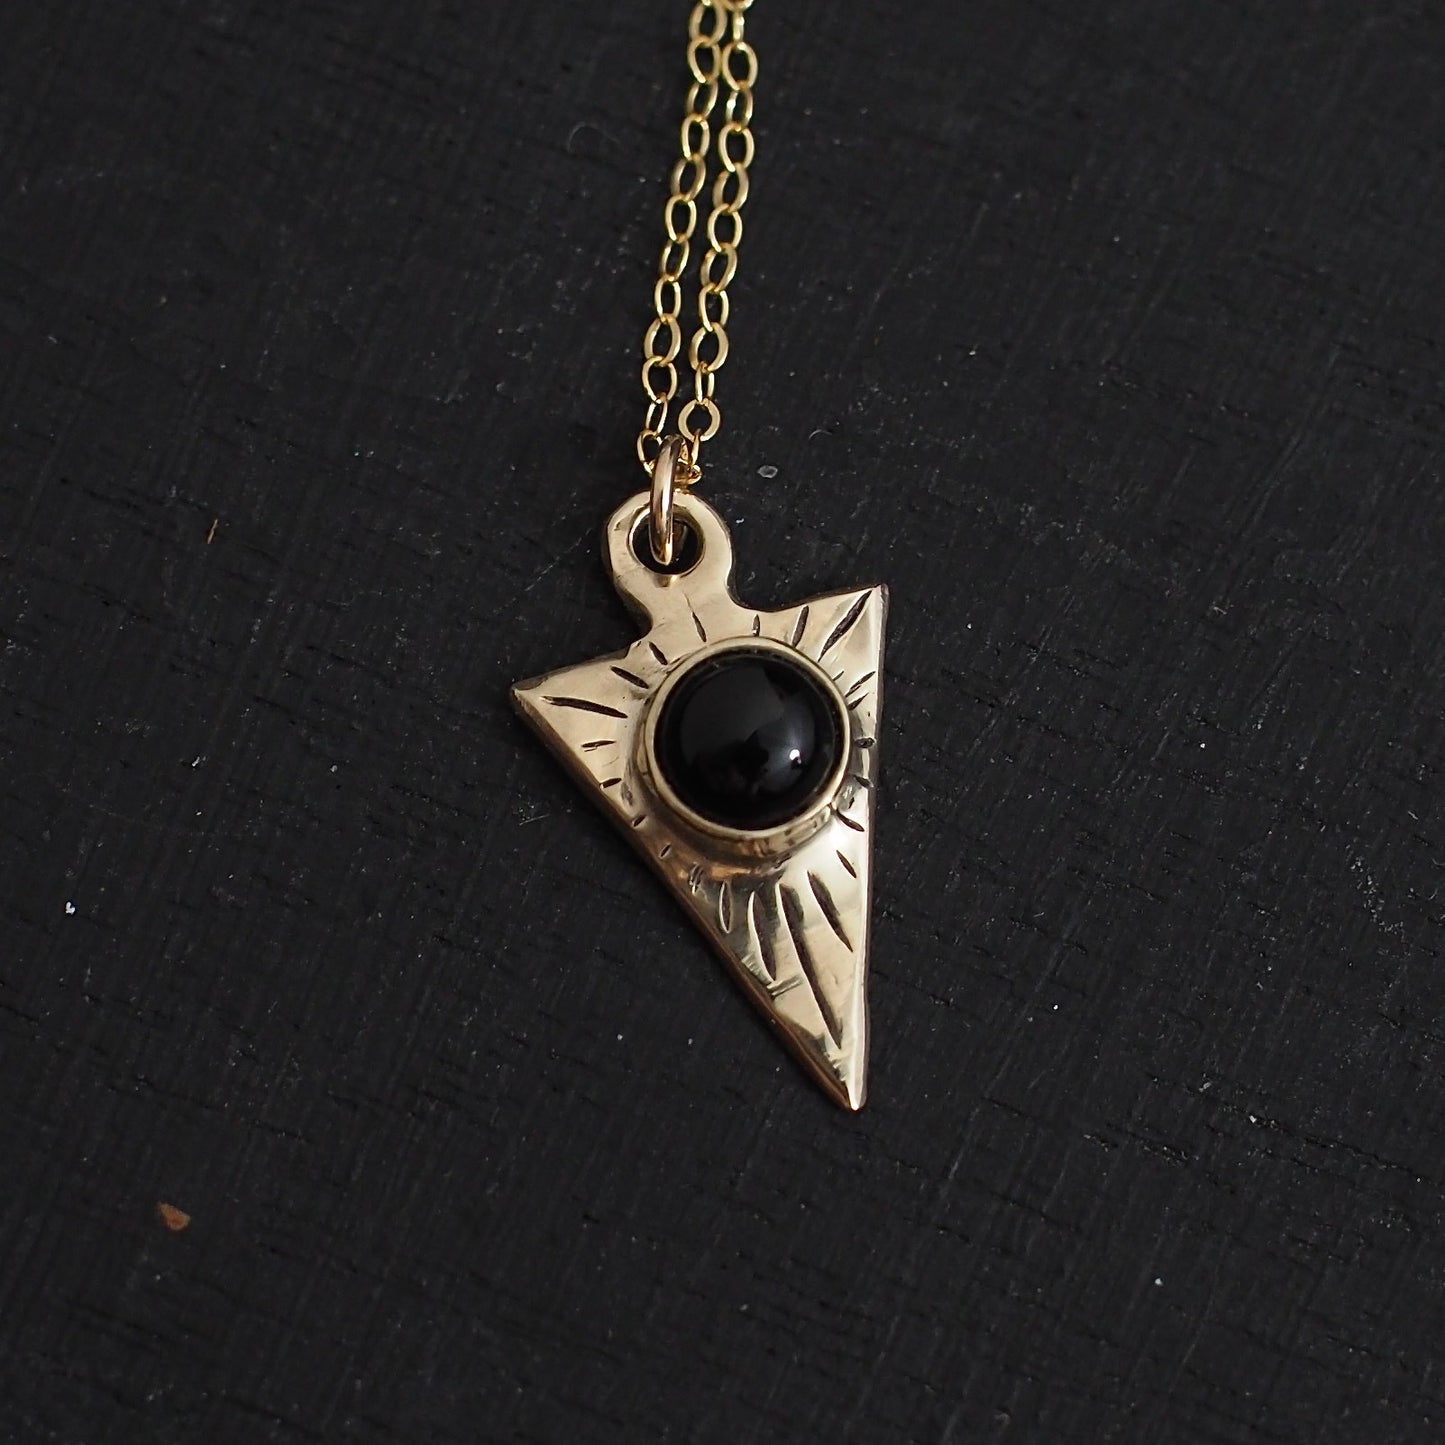 Engraved Onyx Dart Necklace - One of a Kind